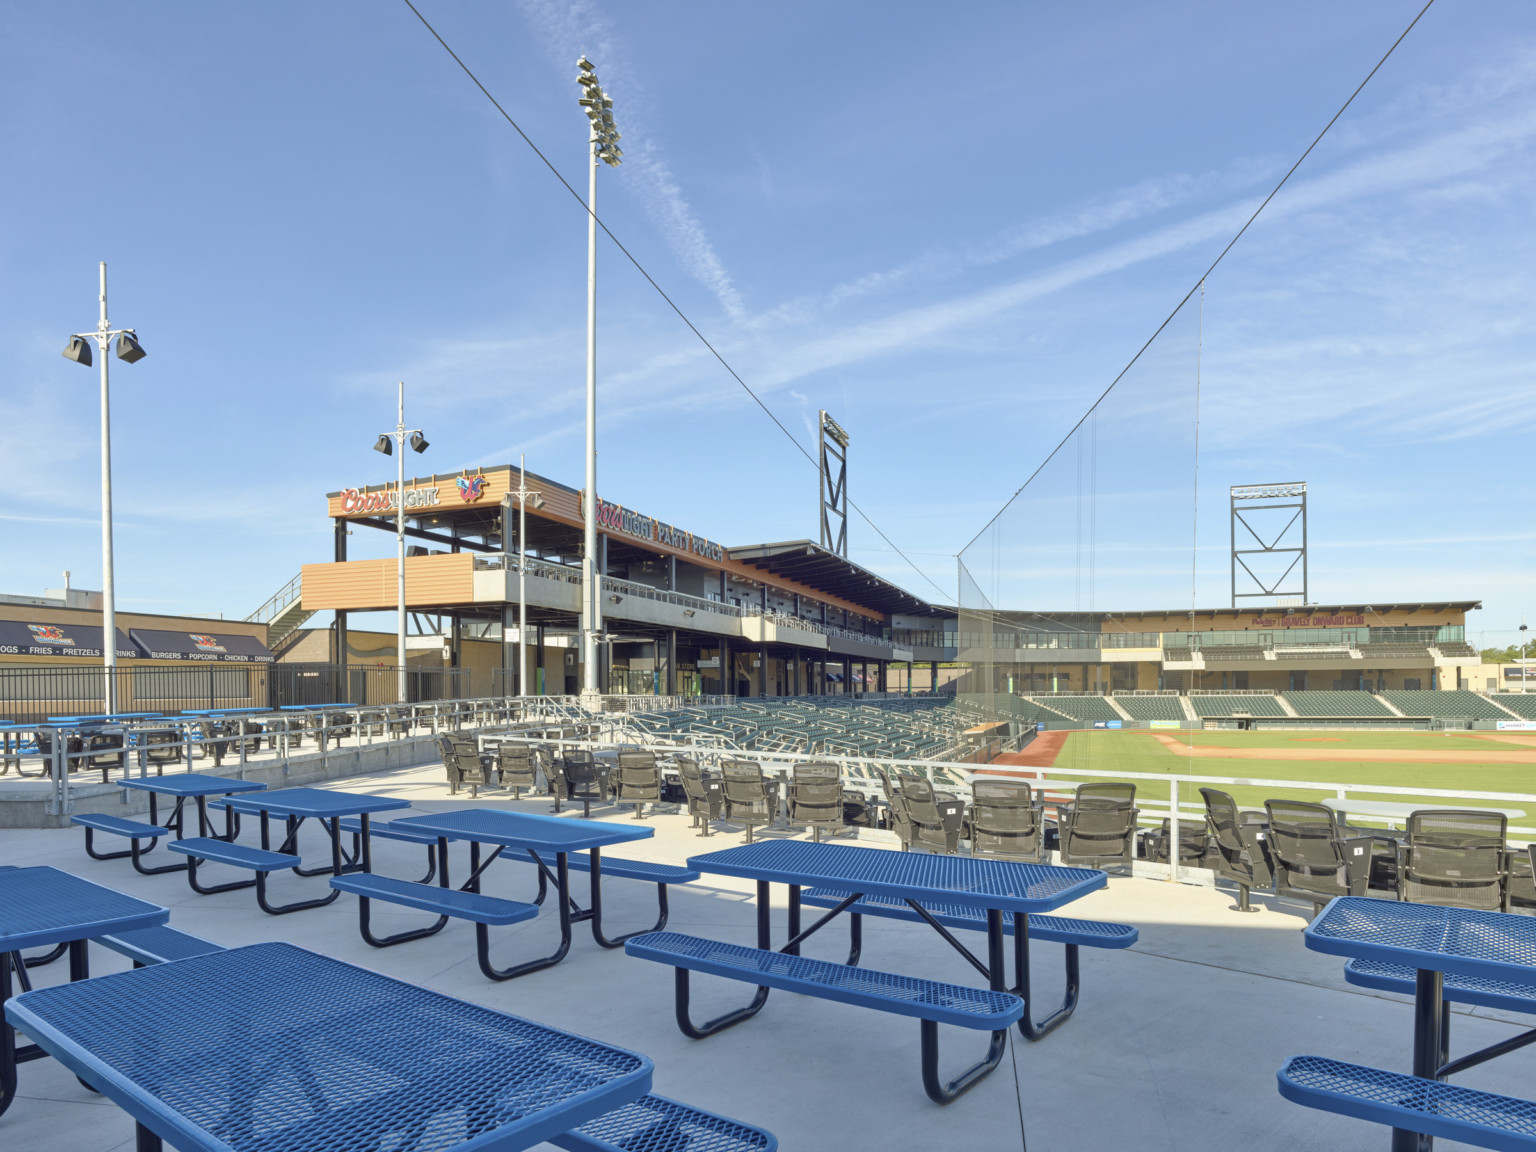 Seating in right field with alterative seating platform and mezzanine with picnic tables and swivel chairs along railing.